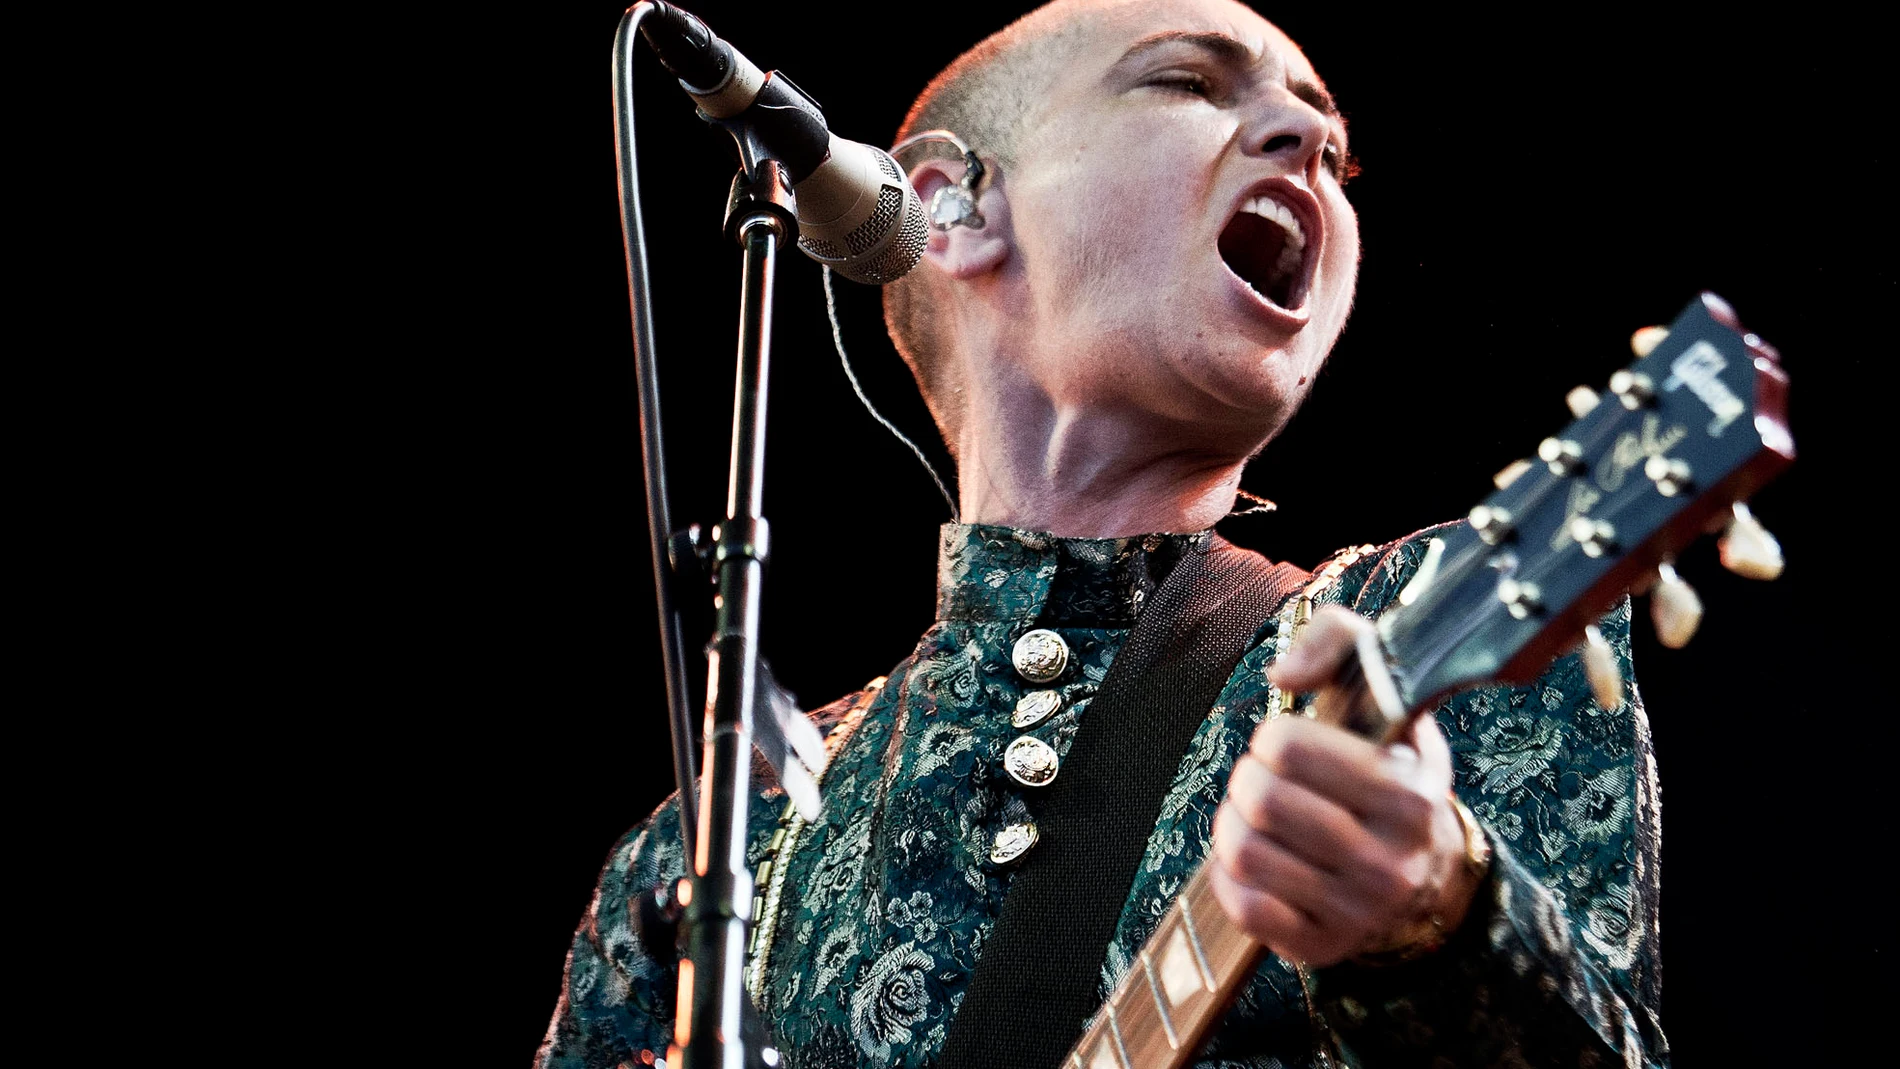 FILE - Irish singer-songwriter Sinéad O'Connor in concert on the first night of the Toender Folk Music Festival in Toender, on the south western part of Denmark on Aug. 23, 2013. O’Connor, the gifted Irish singer-songwriter who became a superstar in her mid-20s but was known as much for her private struggles and provocative actions as for her fierce and expressive music, has died at 56. The singer's family issued a statement reported Wednesday by the BBC and RTE. (AP Photo/Casper Dalhoff, Pol...